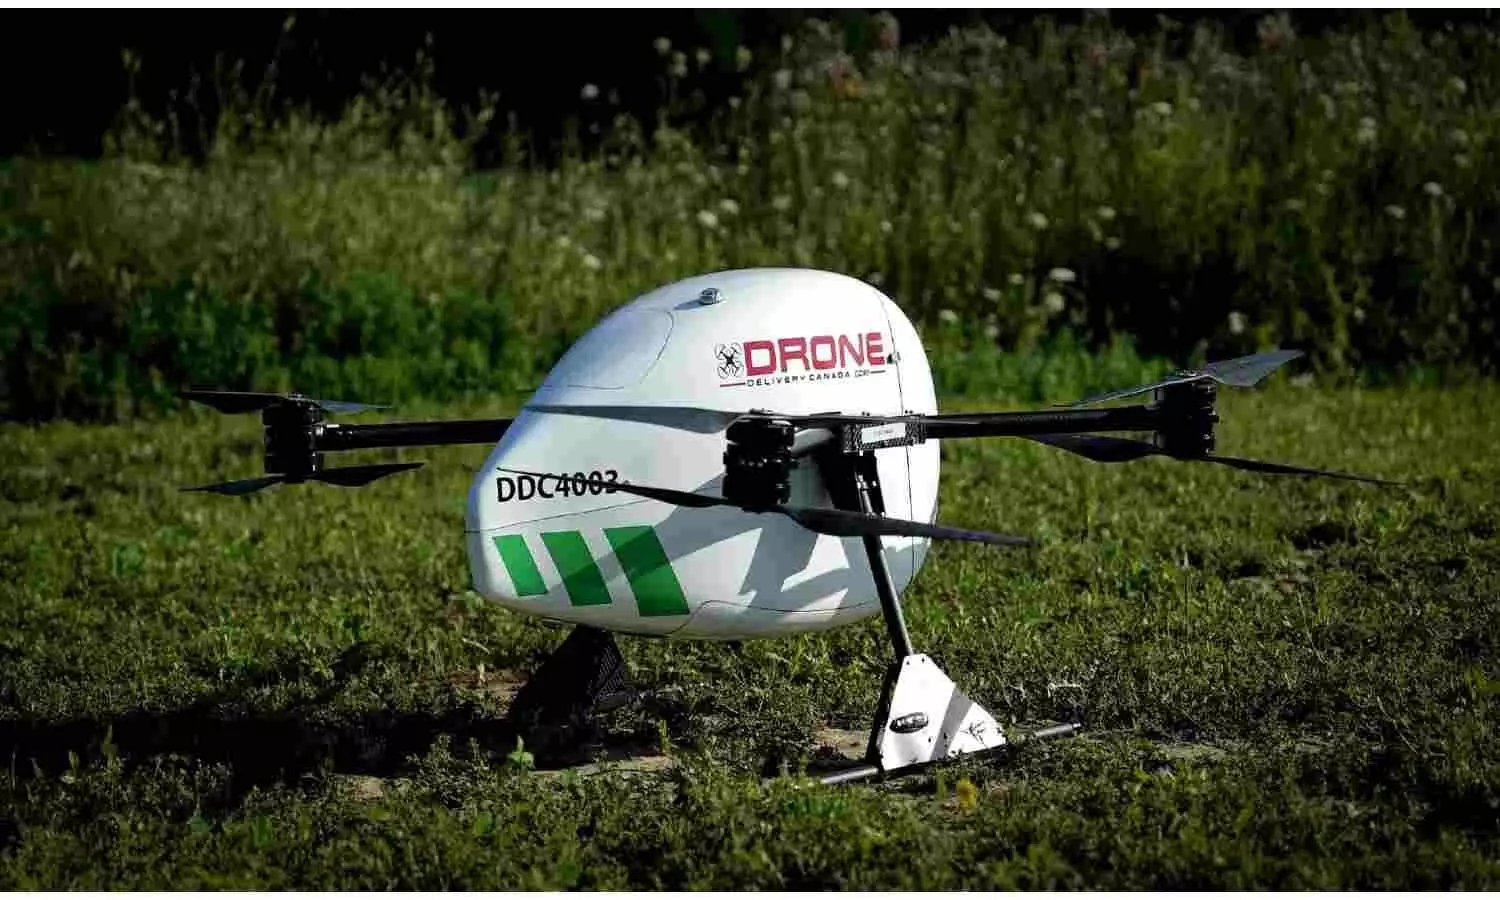 Drone Delivery Canada completes first Canary commercial flights